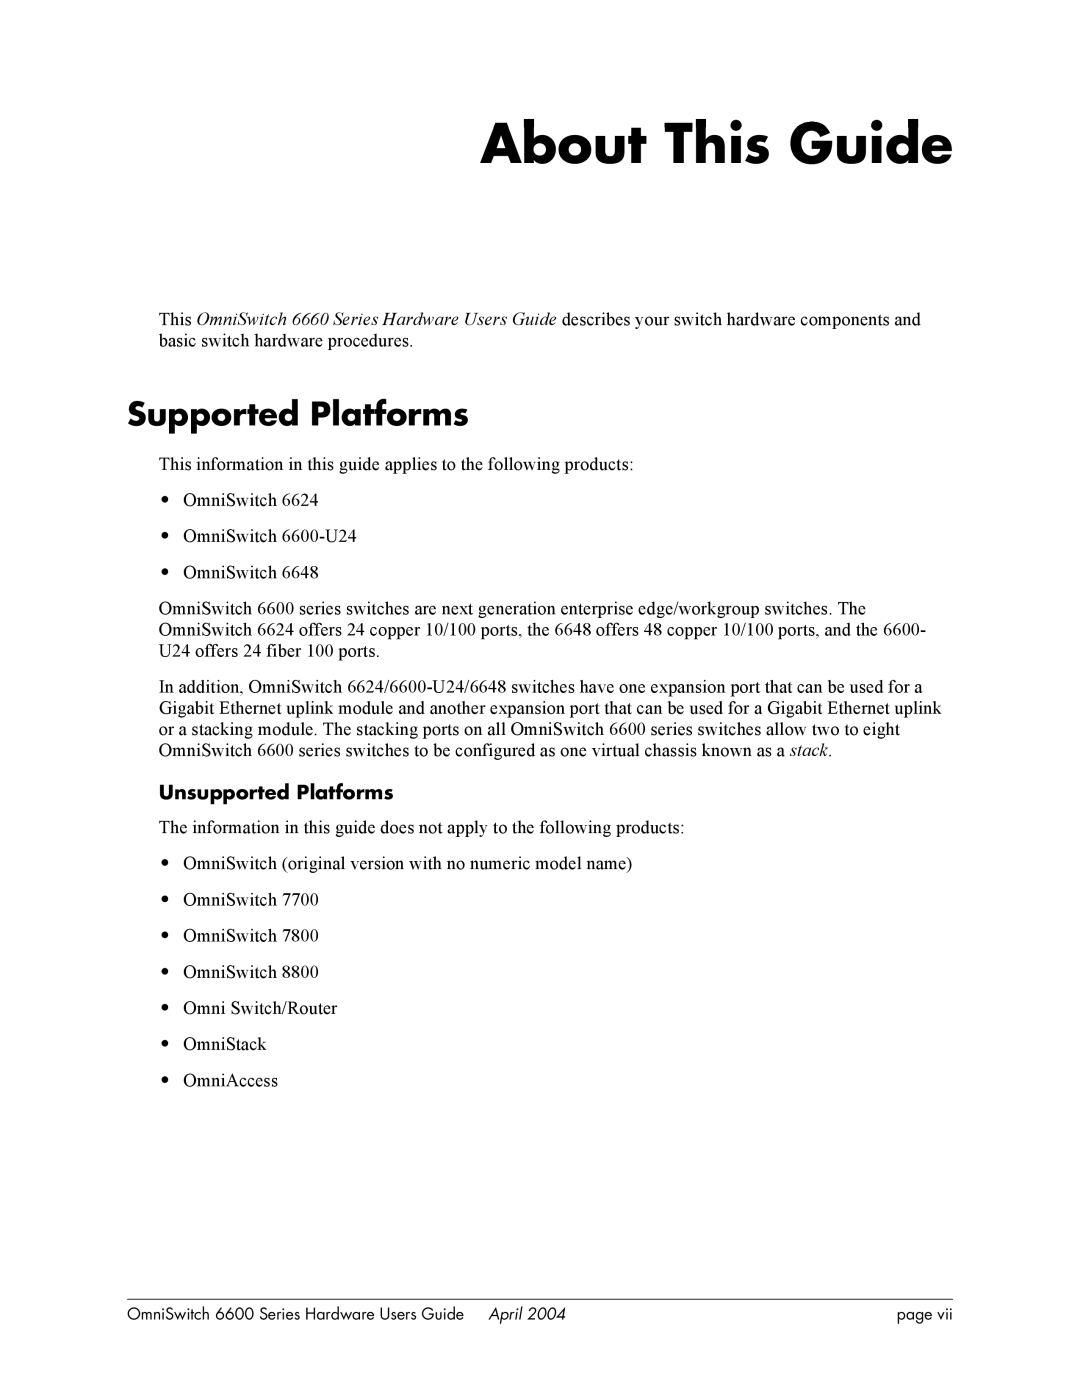 Alcatel-Lucent 6624, 6648, 6600 Series manual About This Guide, Supported Platforms, Unsupported Platforms 